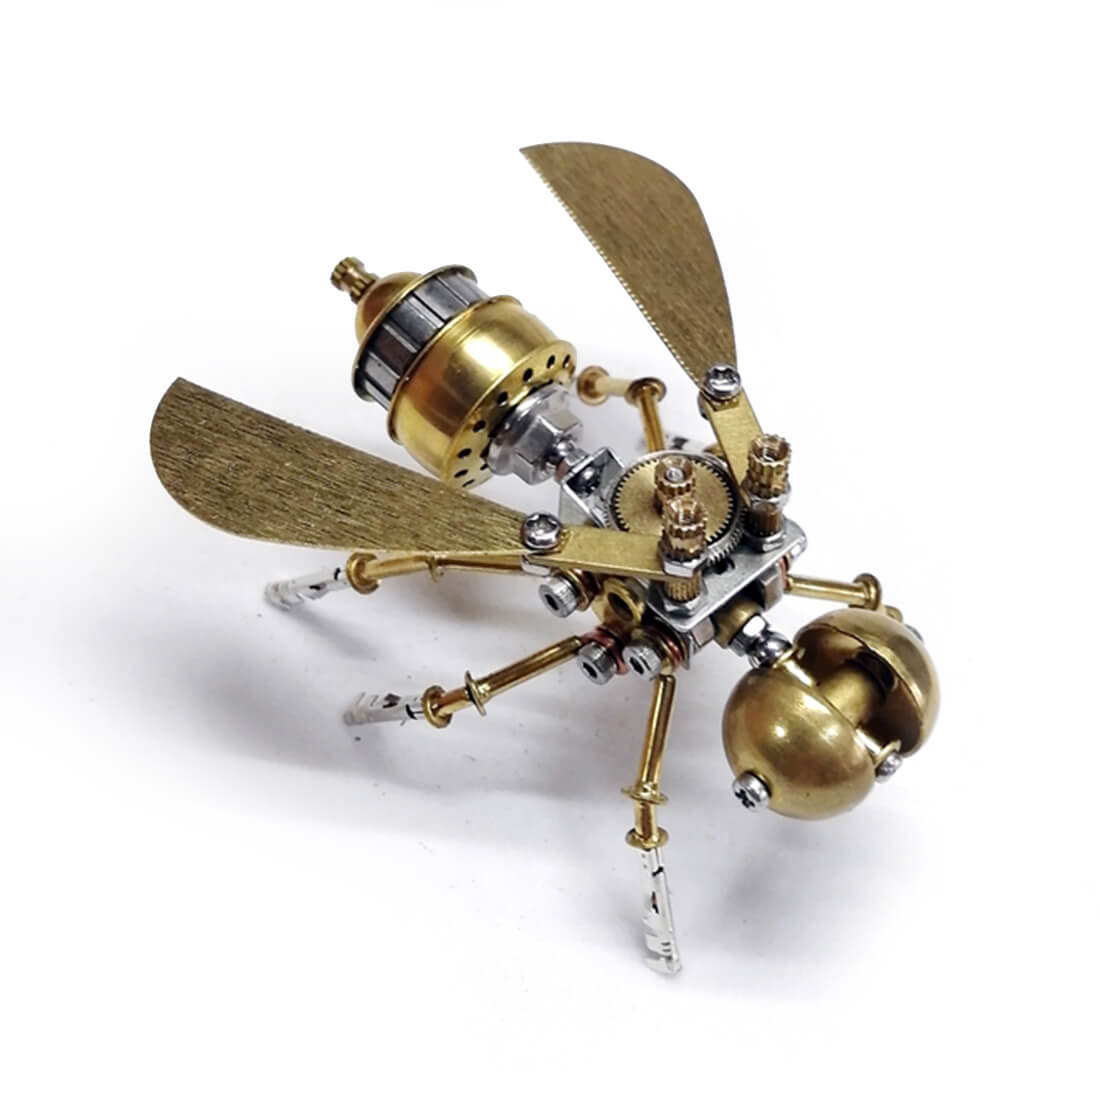 3D DIY Steampunk Mechanical Insect Metal Assembly Model (100+PCS)